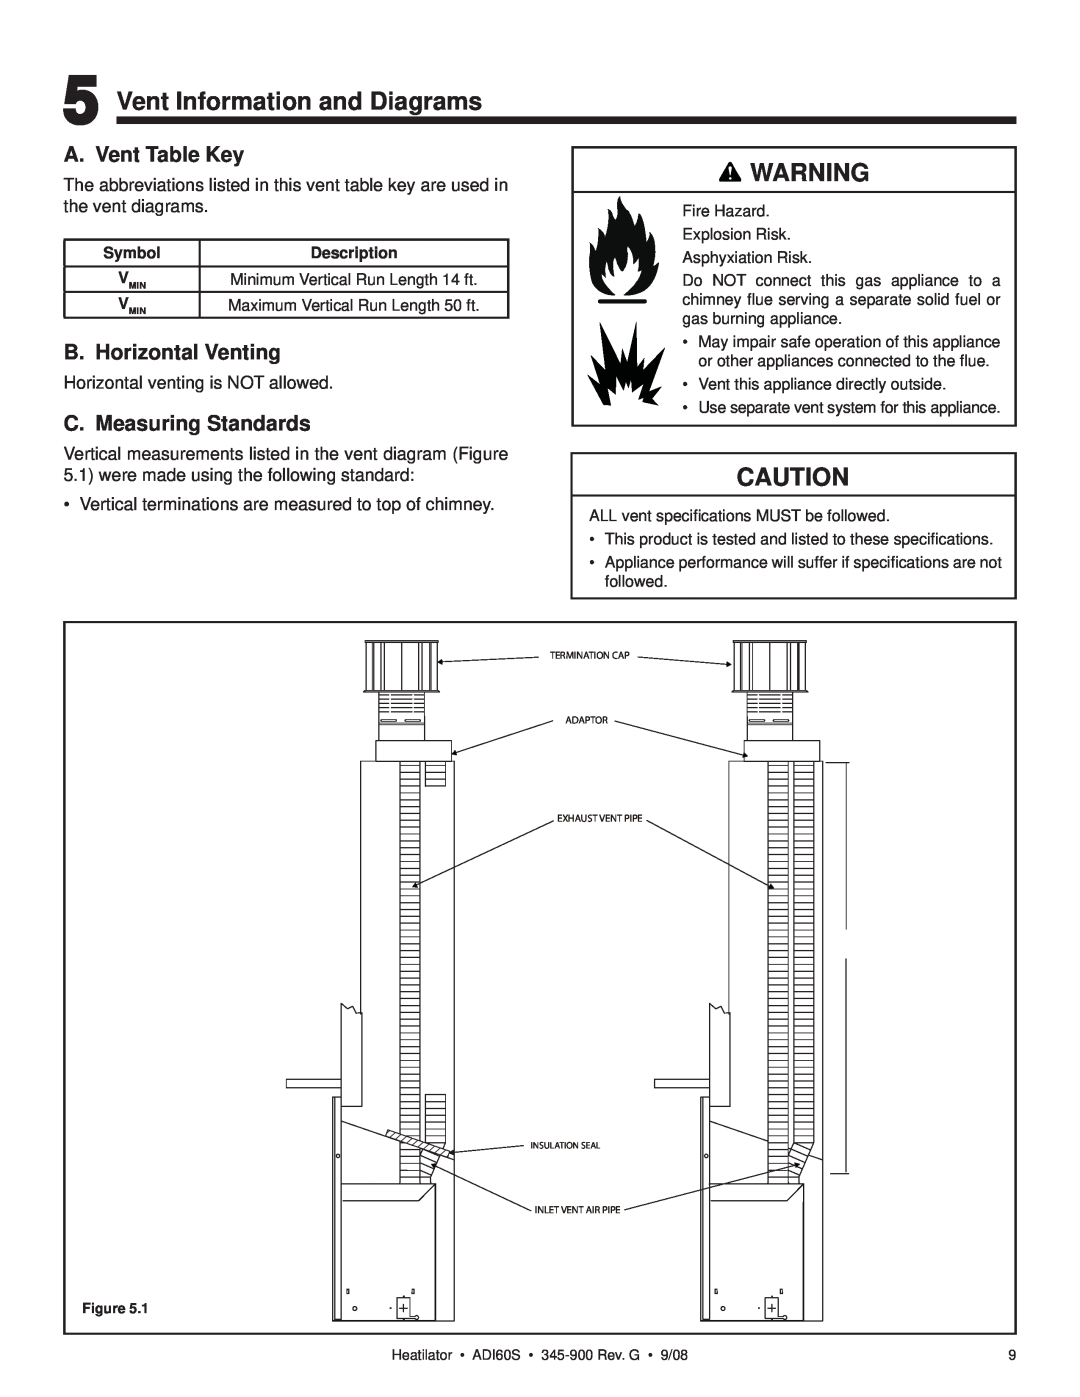 Heatiator ADI60S Vent Information and Diagrams, A. Vent Table Key, B. Horizontal Venting, C. Measuring Standards 